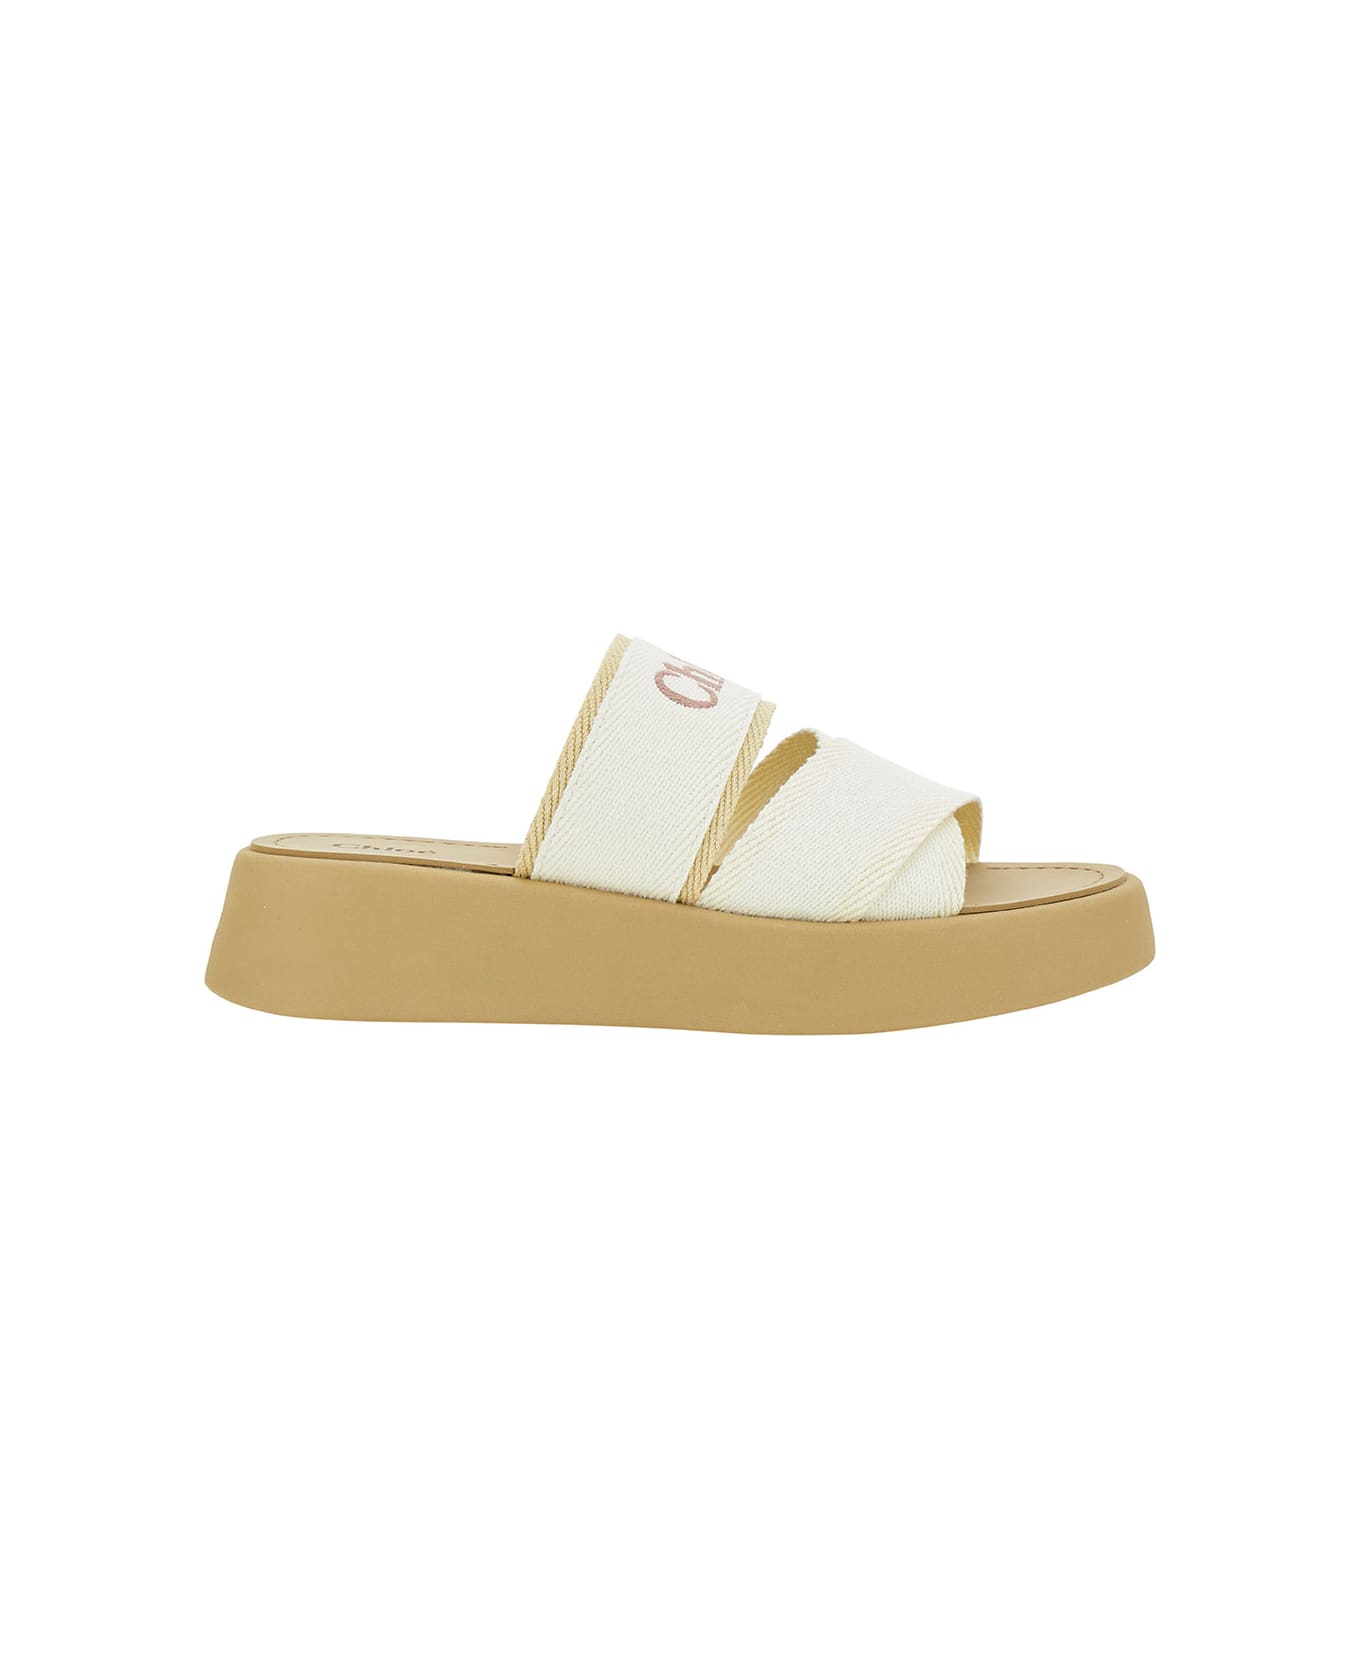 Chloé 'mila' Beige And White Sabot With Branded Strap In Linen Blend Woman - White